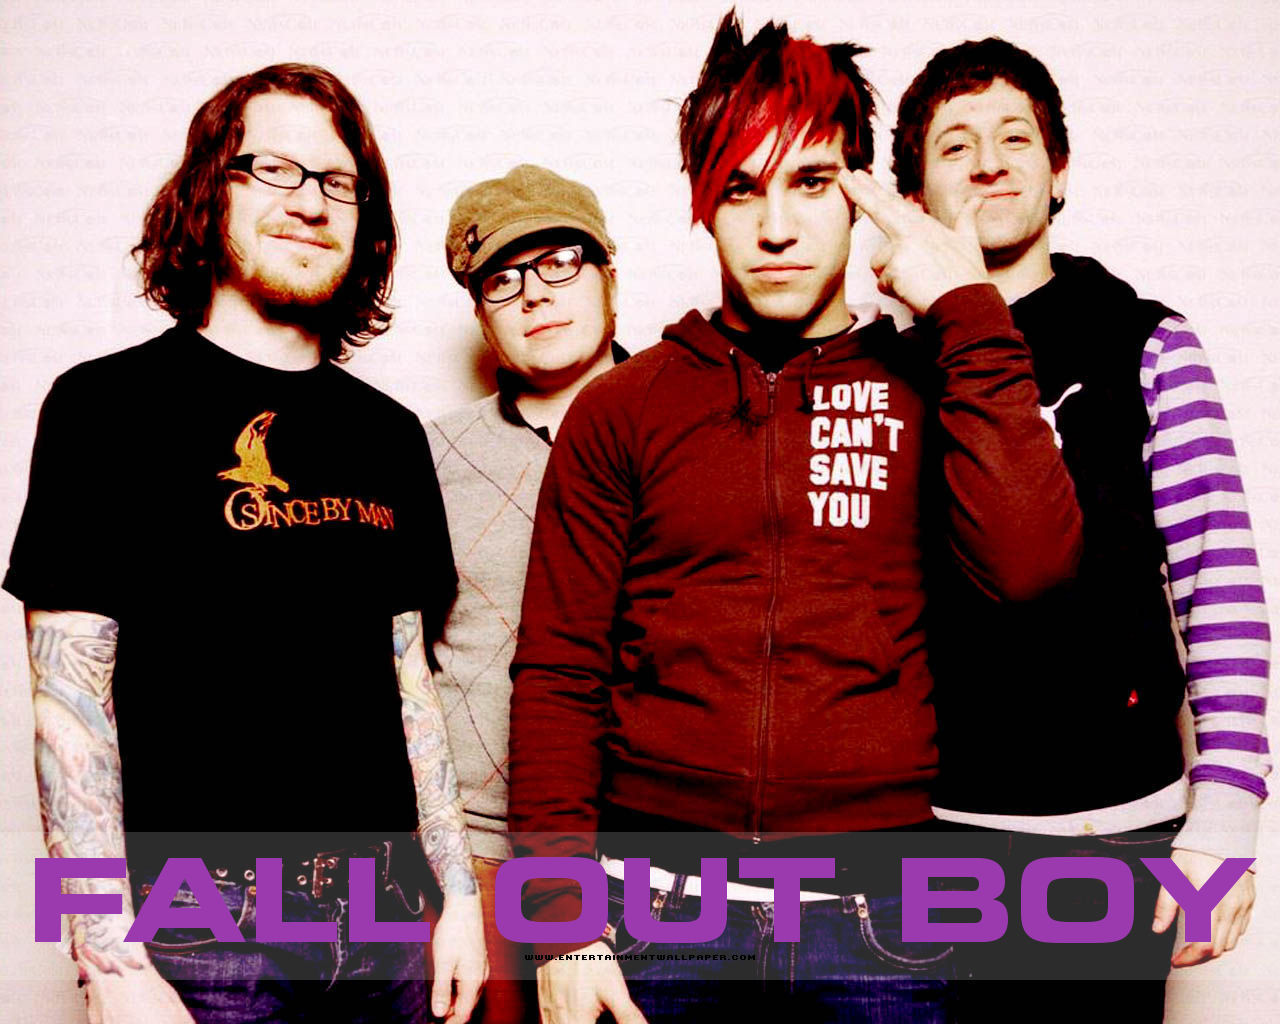 Countdown to my date with Fall Out Boy 7 days to go My